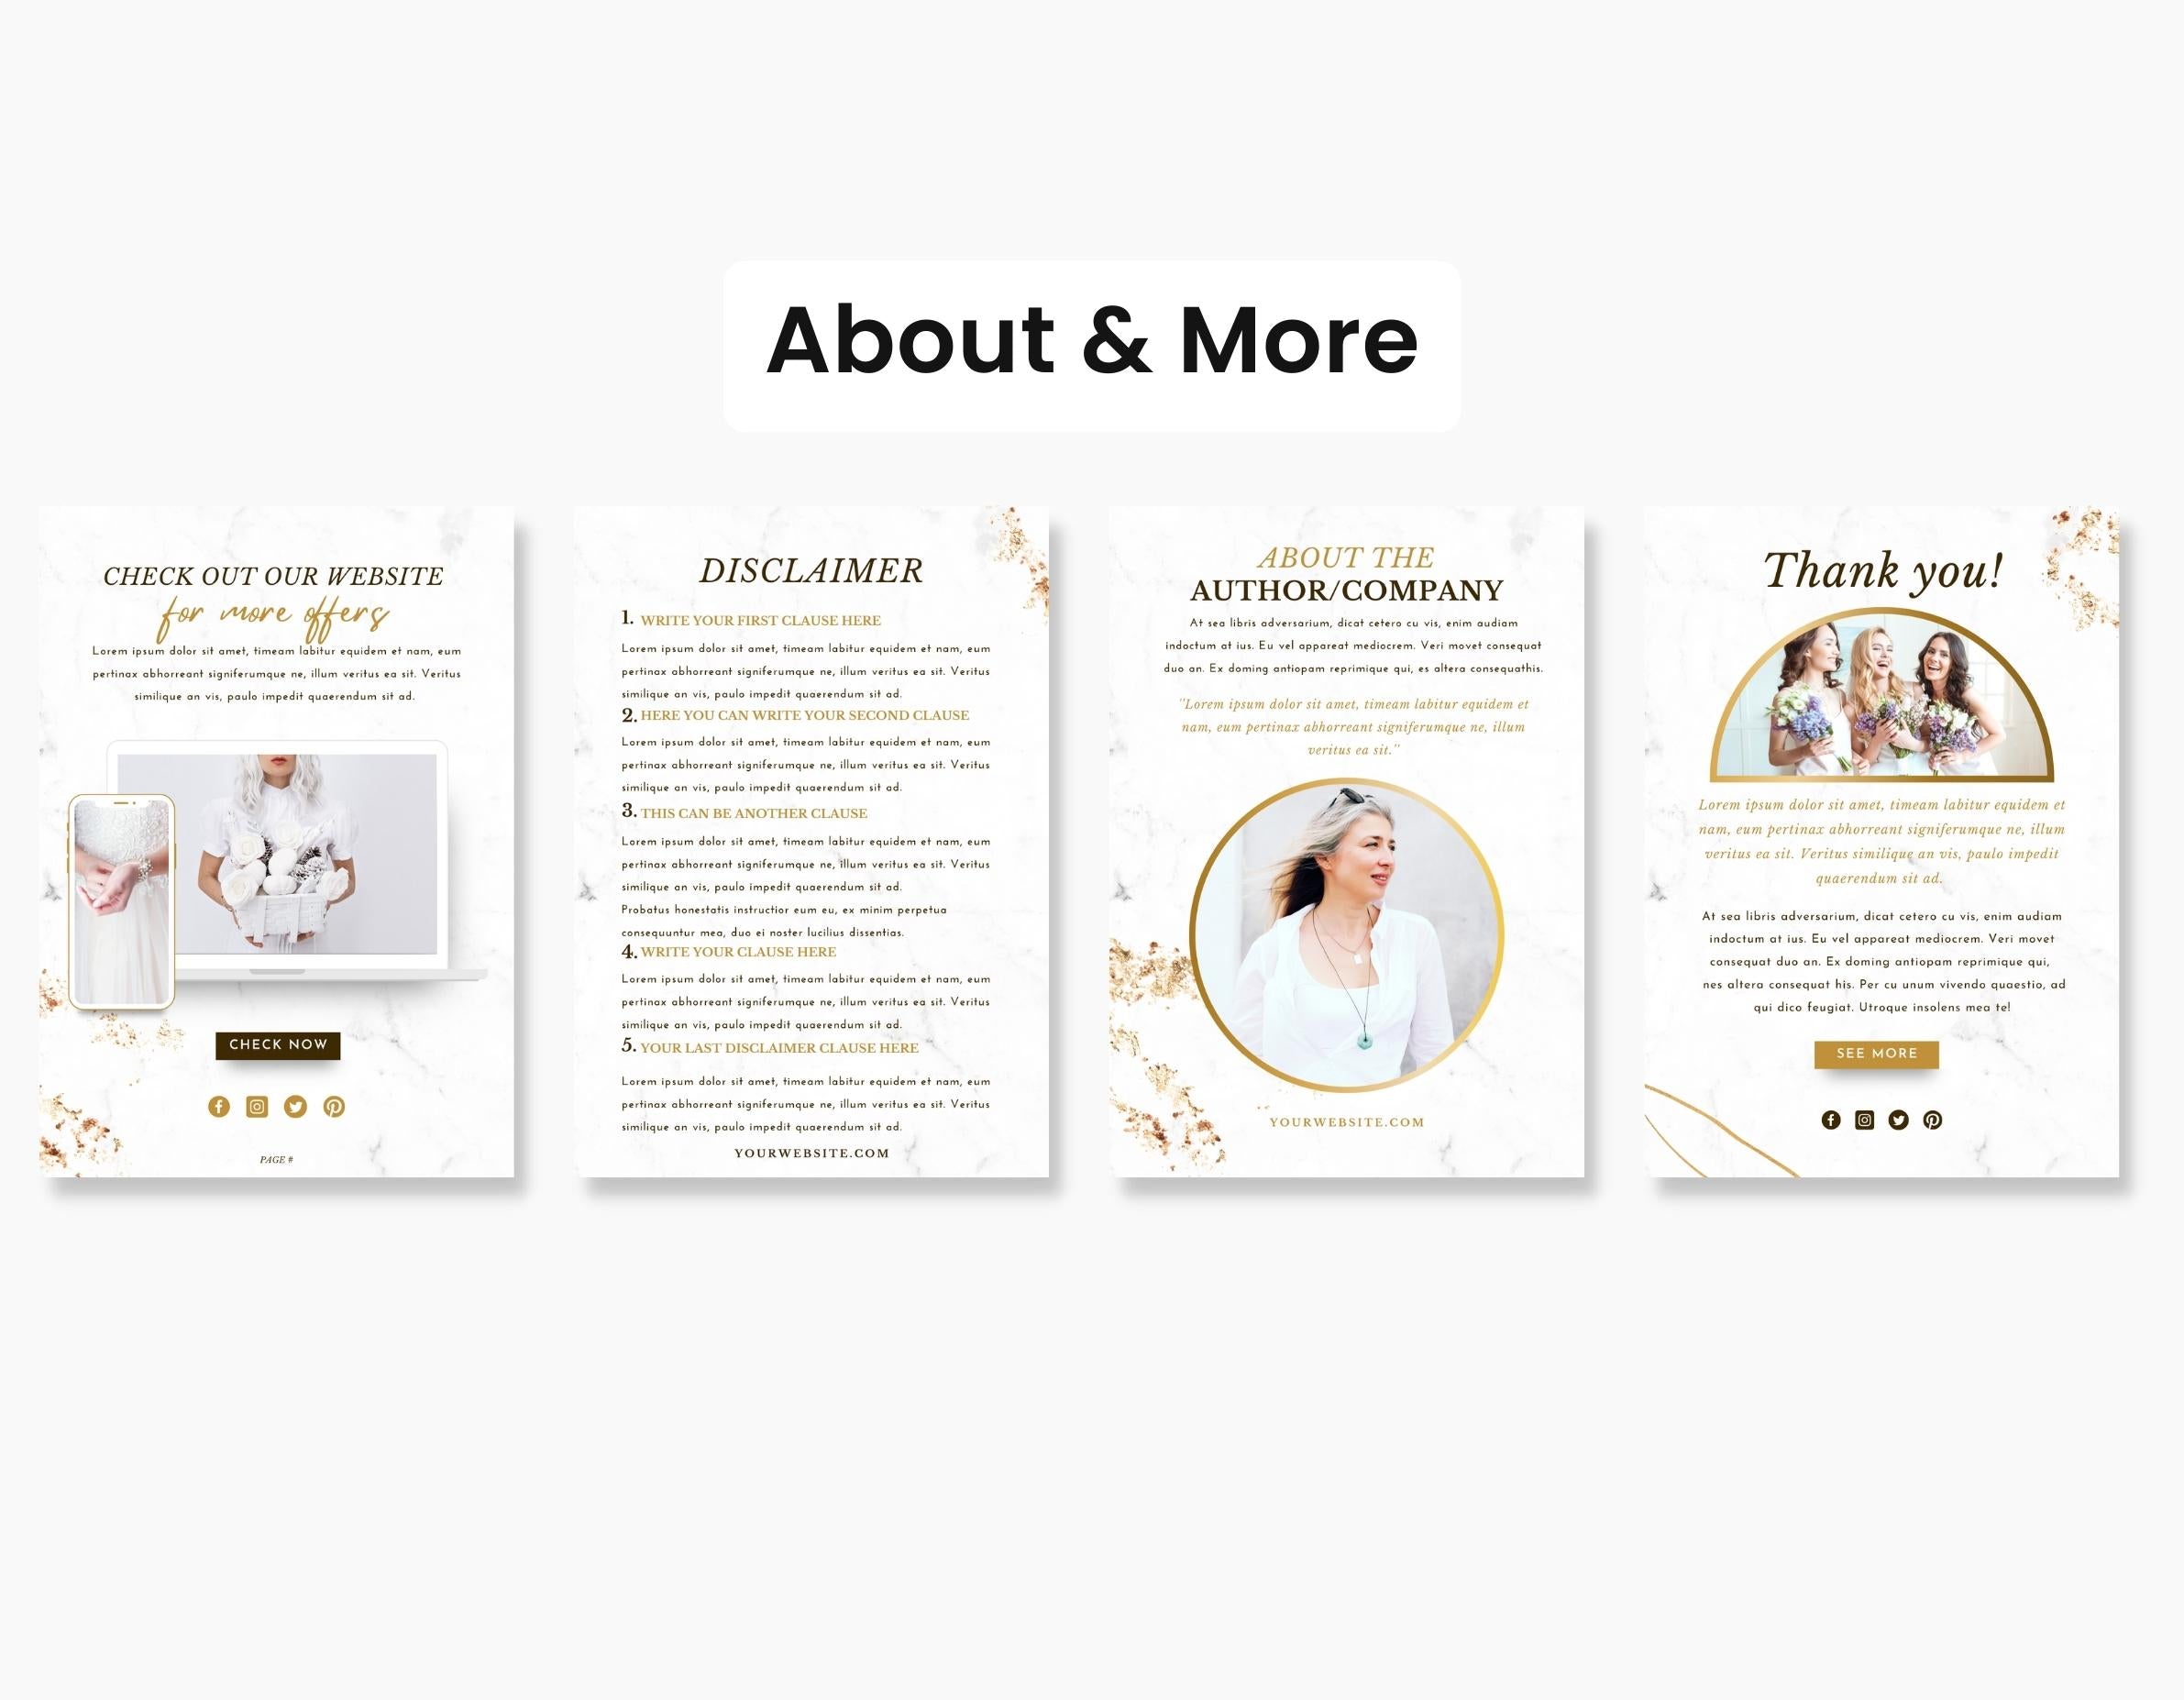 White & Gold Product Catalog Template Canva DigiPax